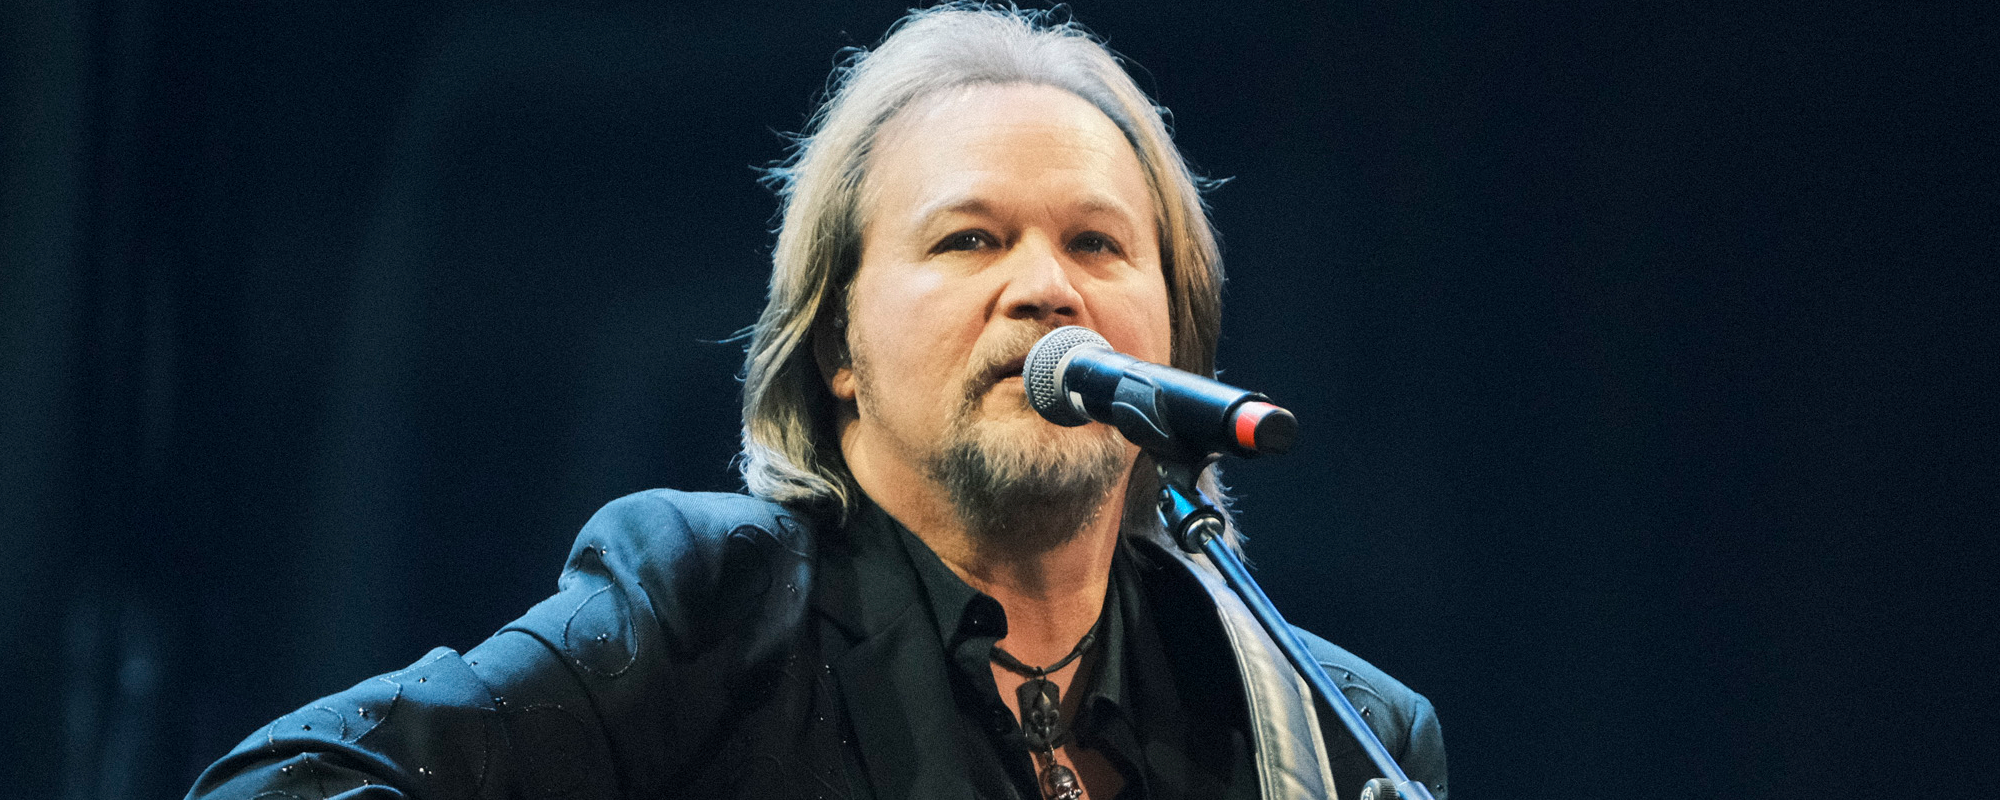 Travis Tritt Honors Waylon Jennings With Acoustic Medley Performance at the Caverns